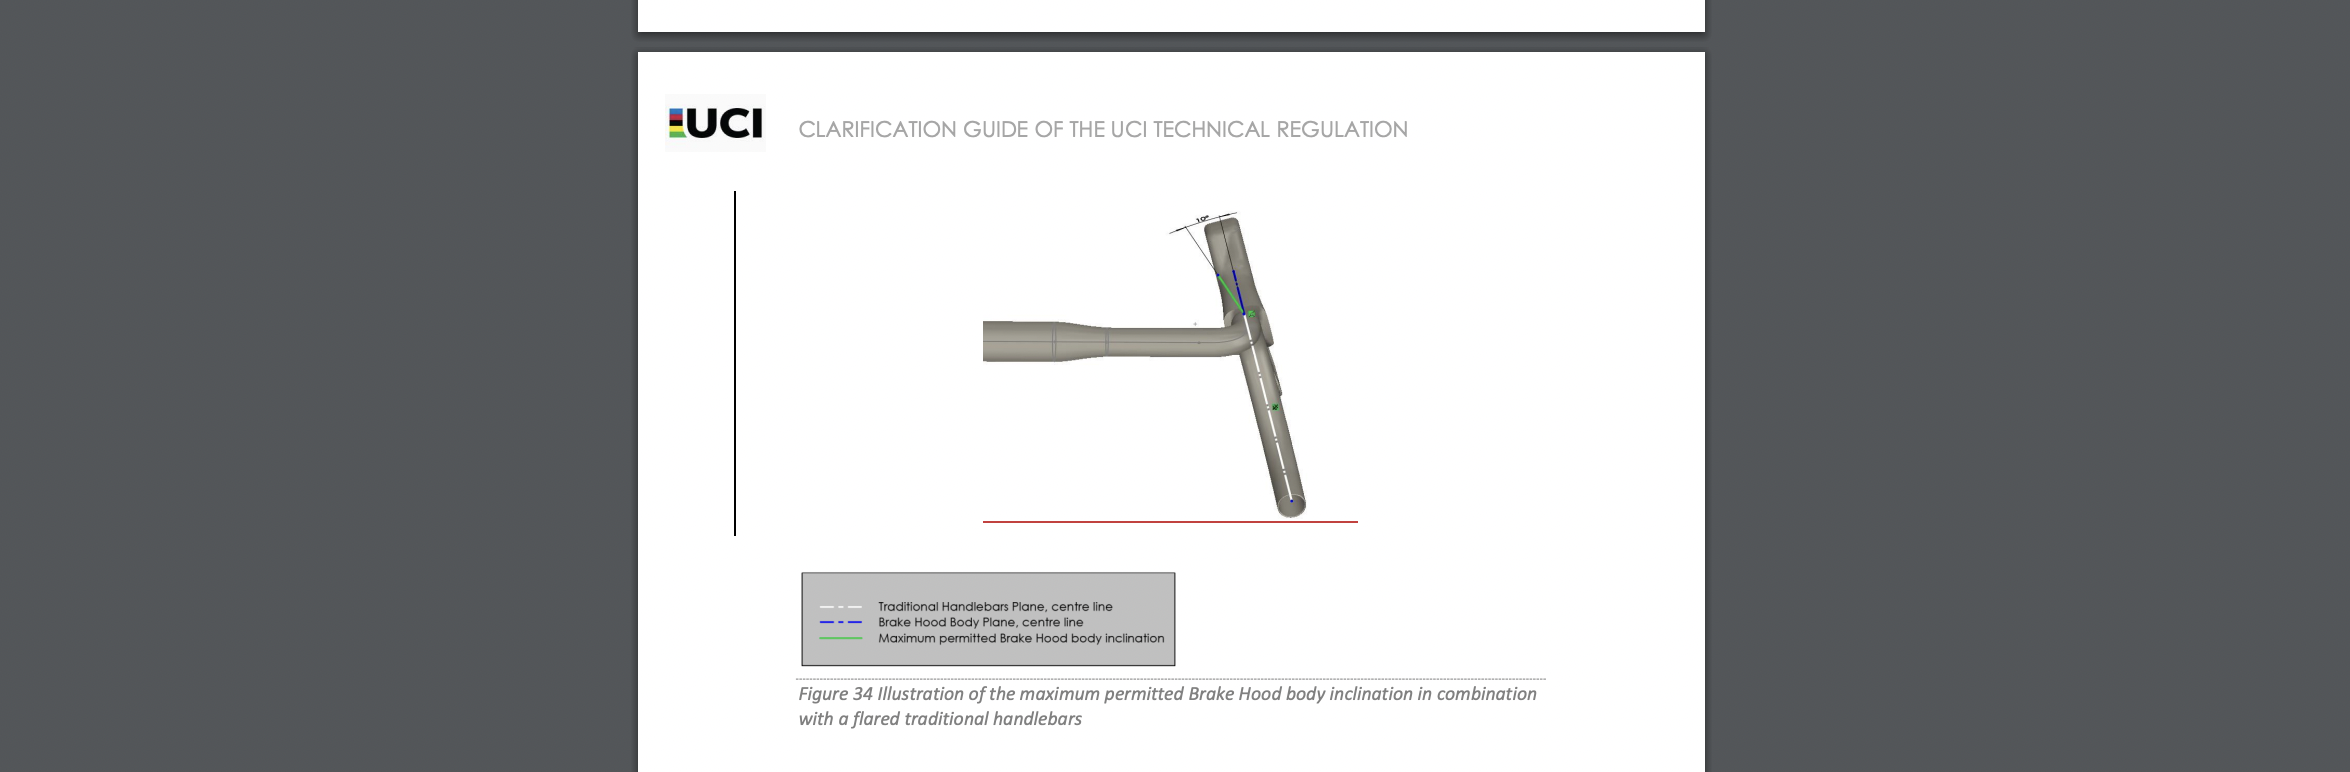 The image is a screenshot of an update to the UCI clarification guide confirming the maximum 10° lever angle.